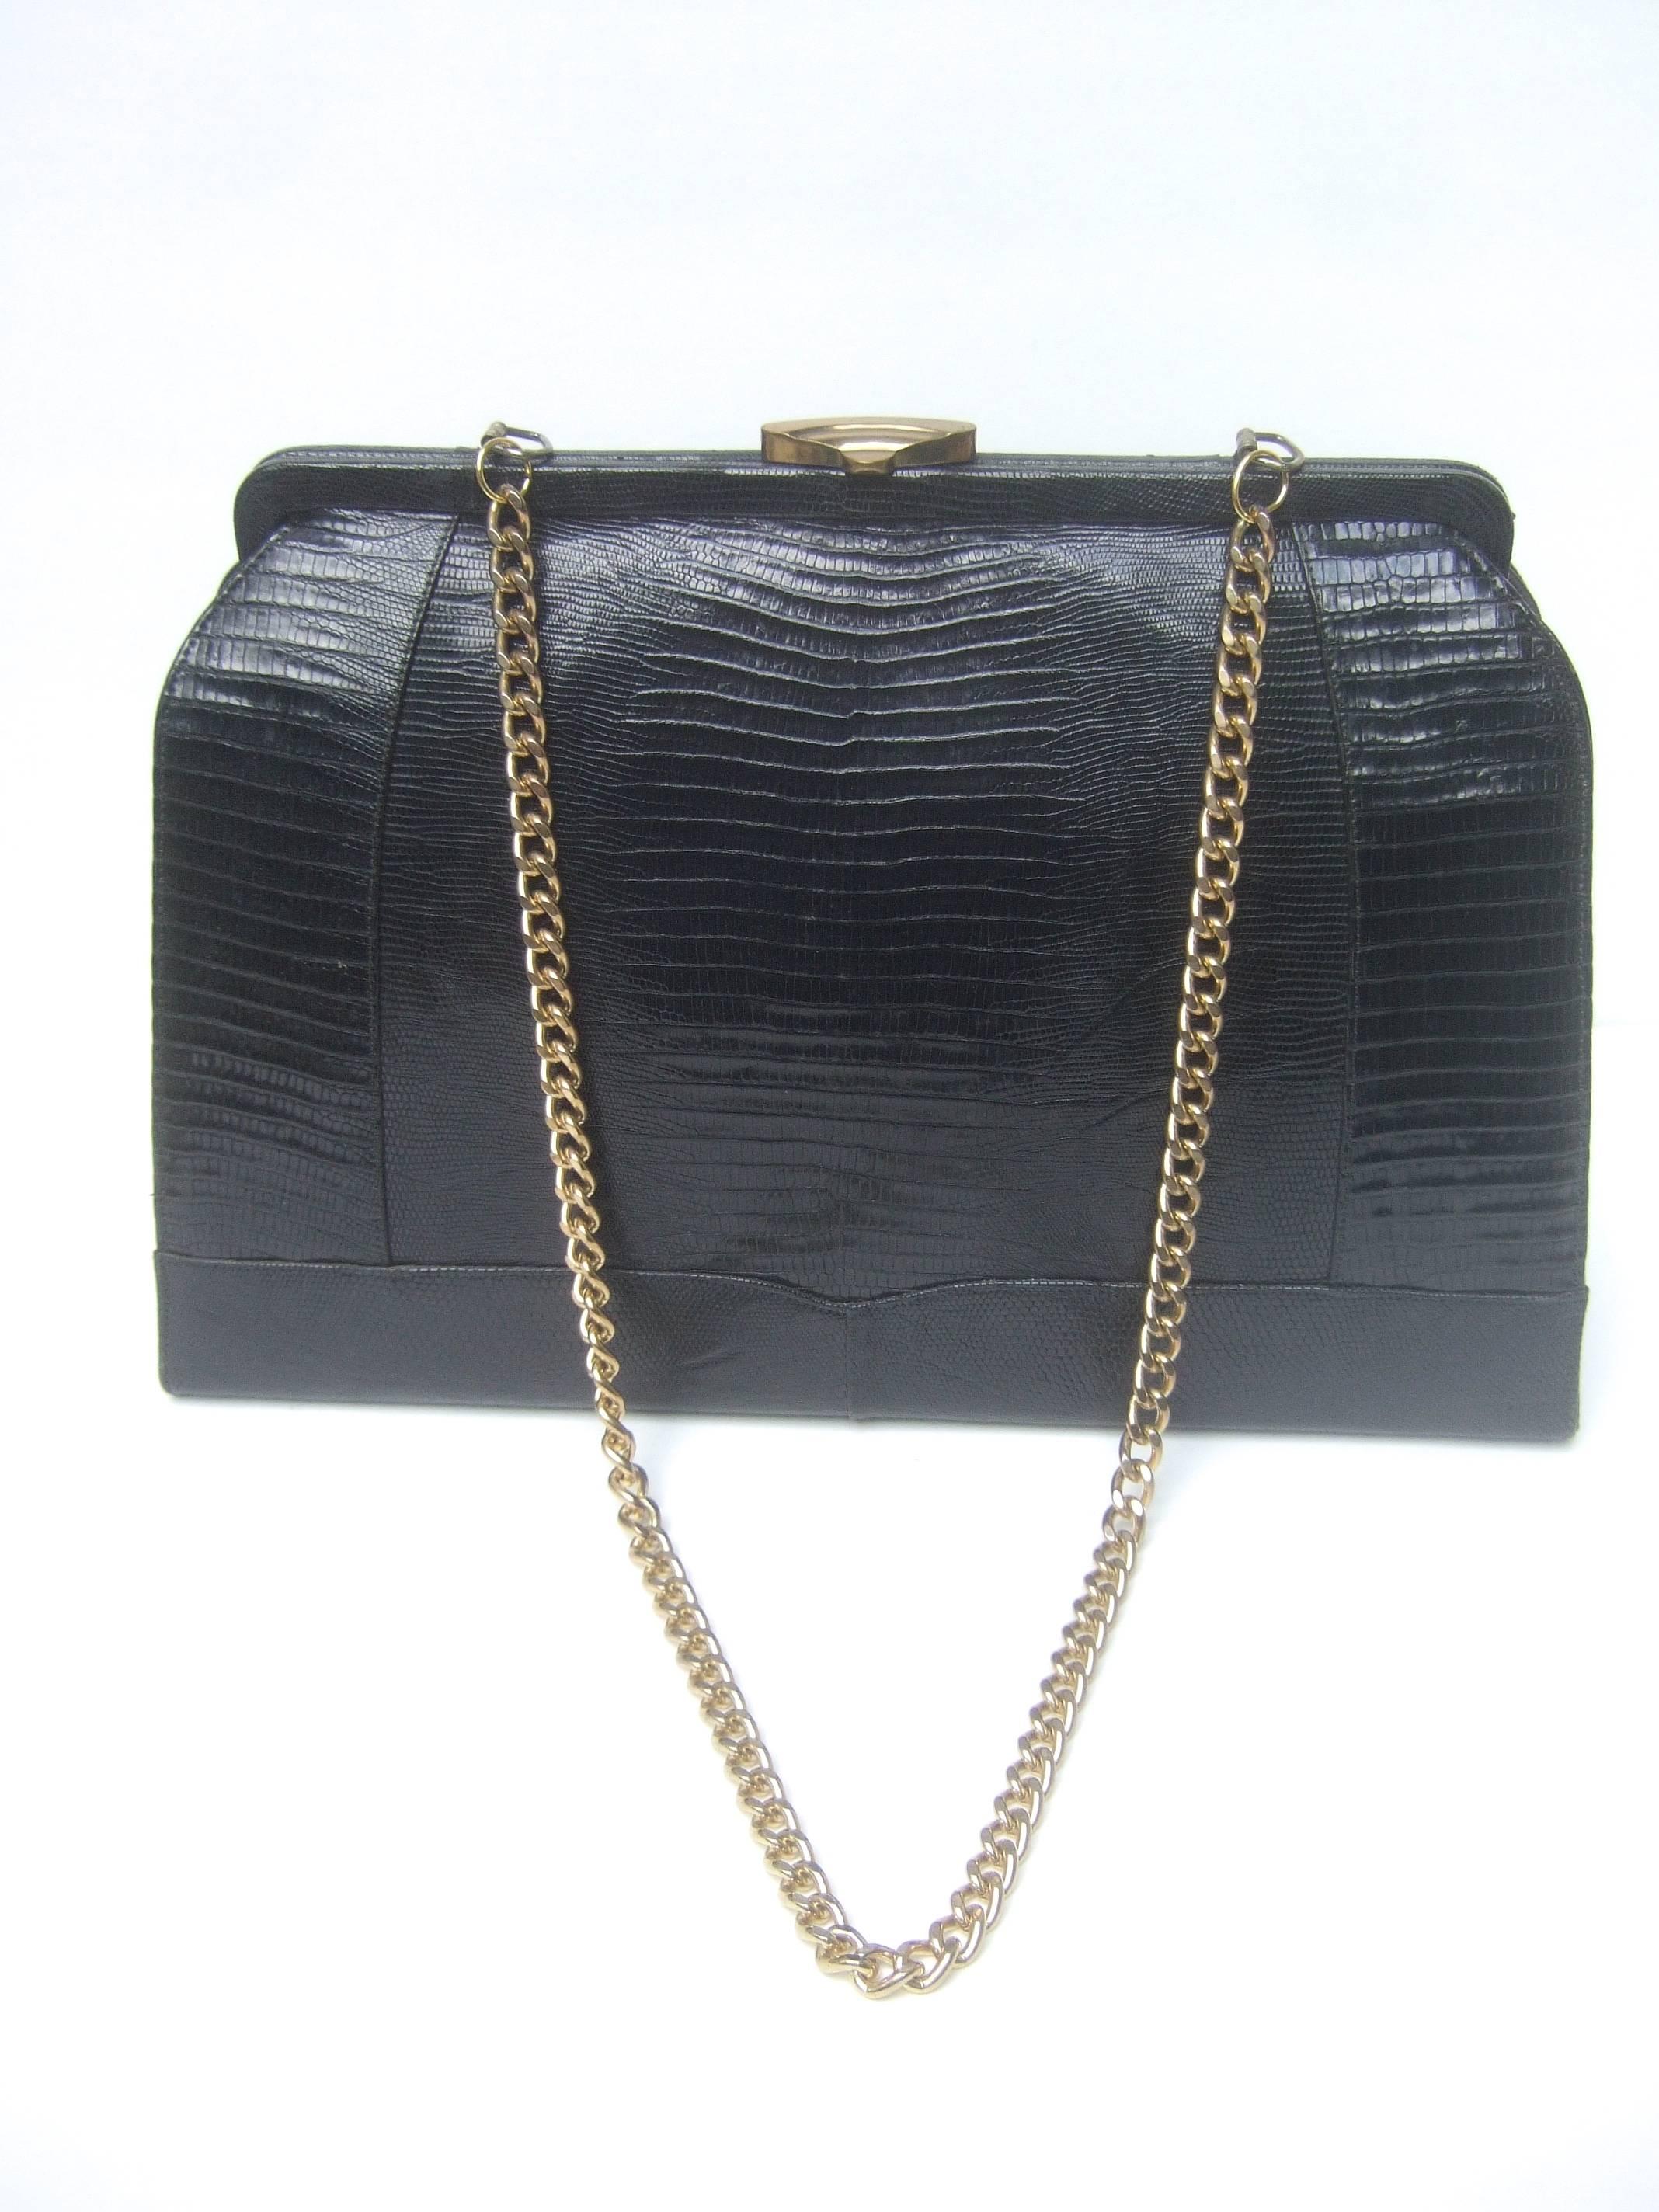 Sleek ebony lizard skin structured large handbag c 1960
The stylish retro large scale shoulder bag is covered
with lacquered lizard skin 

The clasp and shoulder strap chain are gilt metal
The interior of the shoulder bag is lined in black